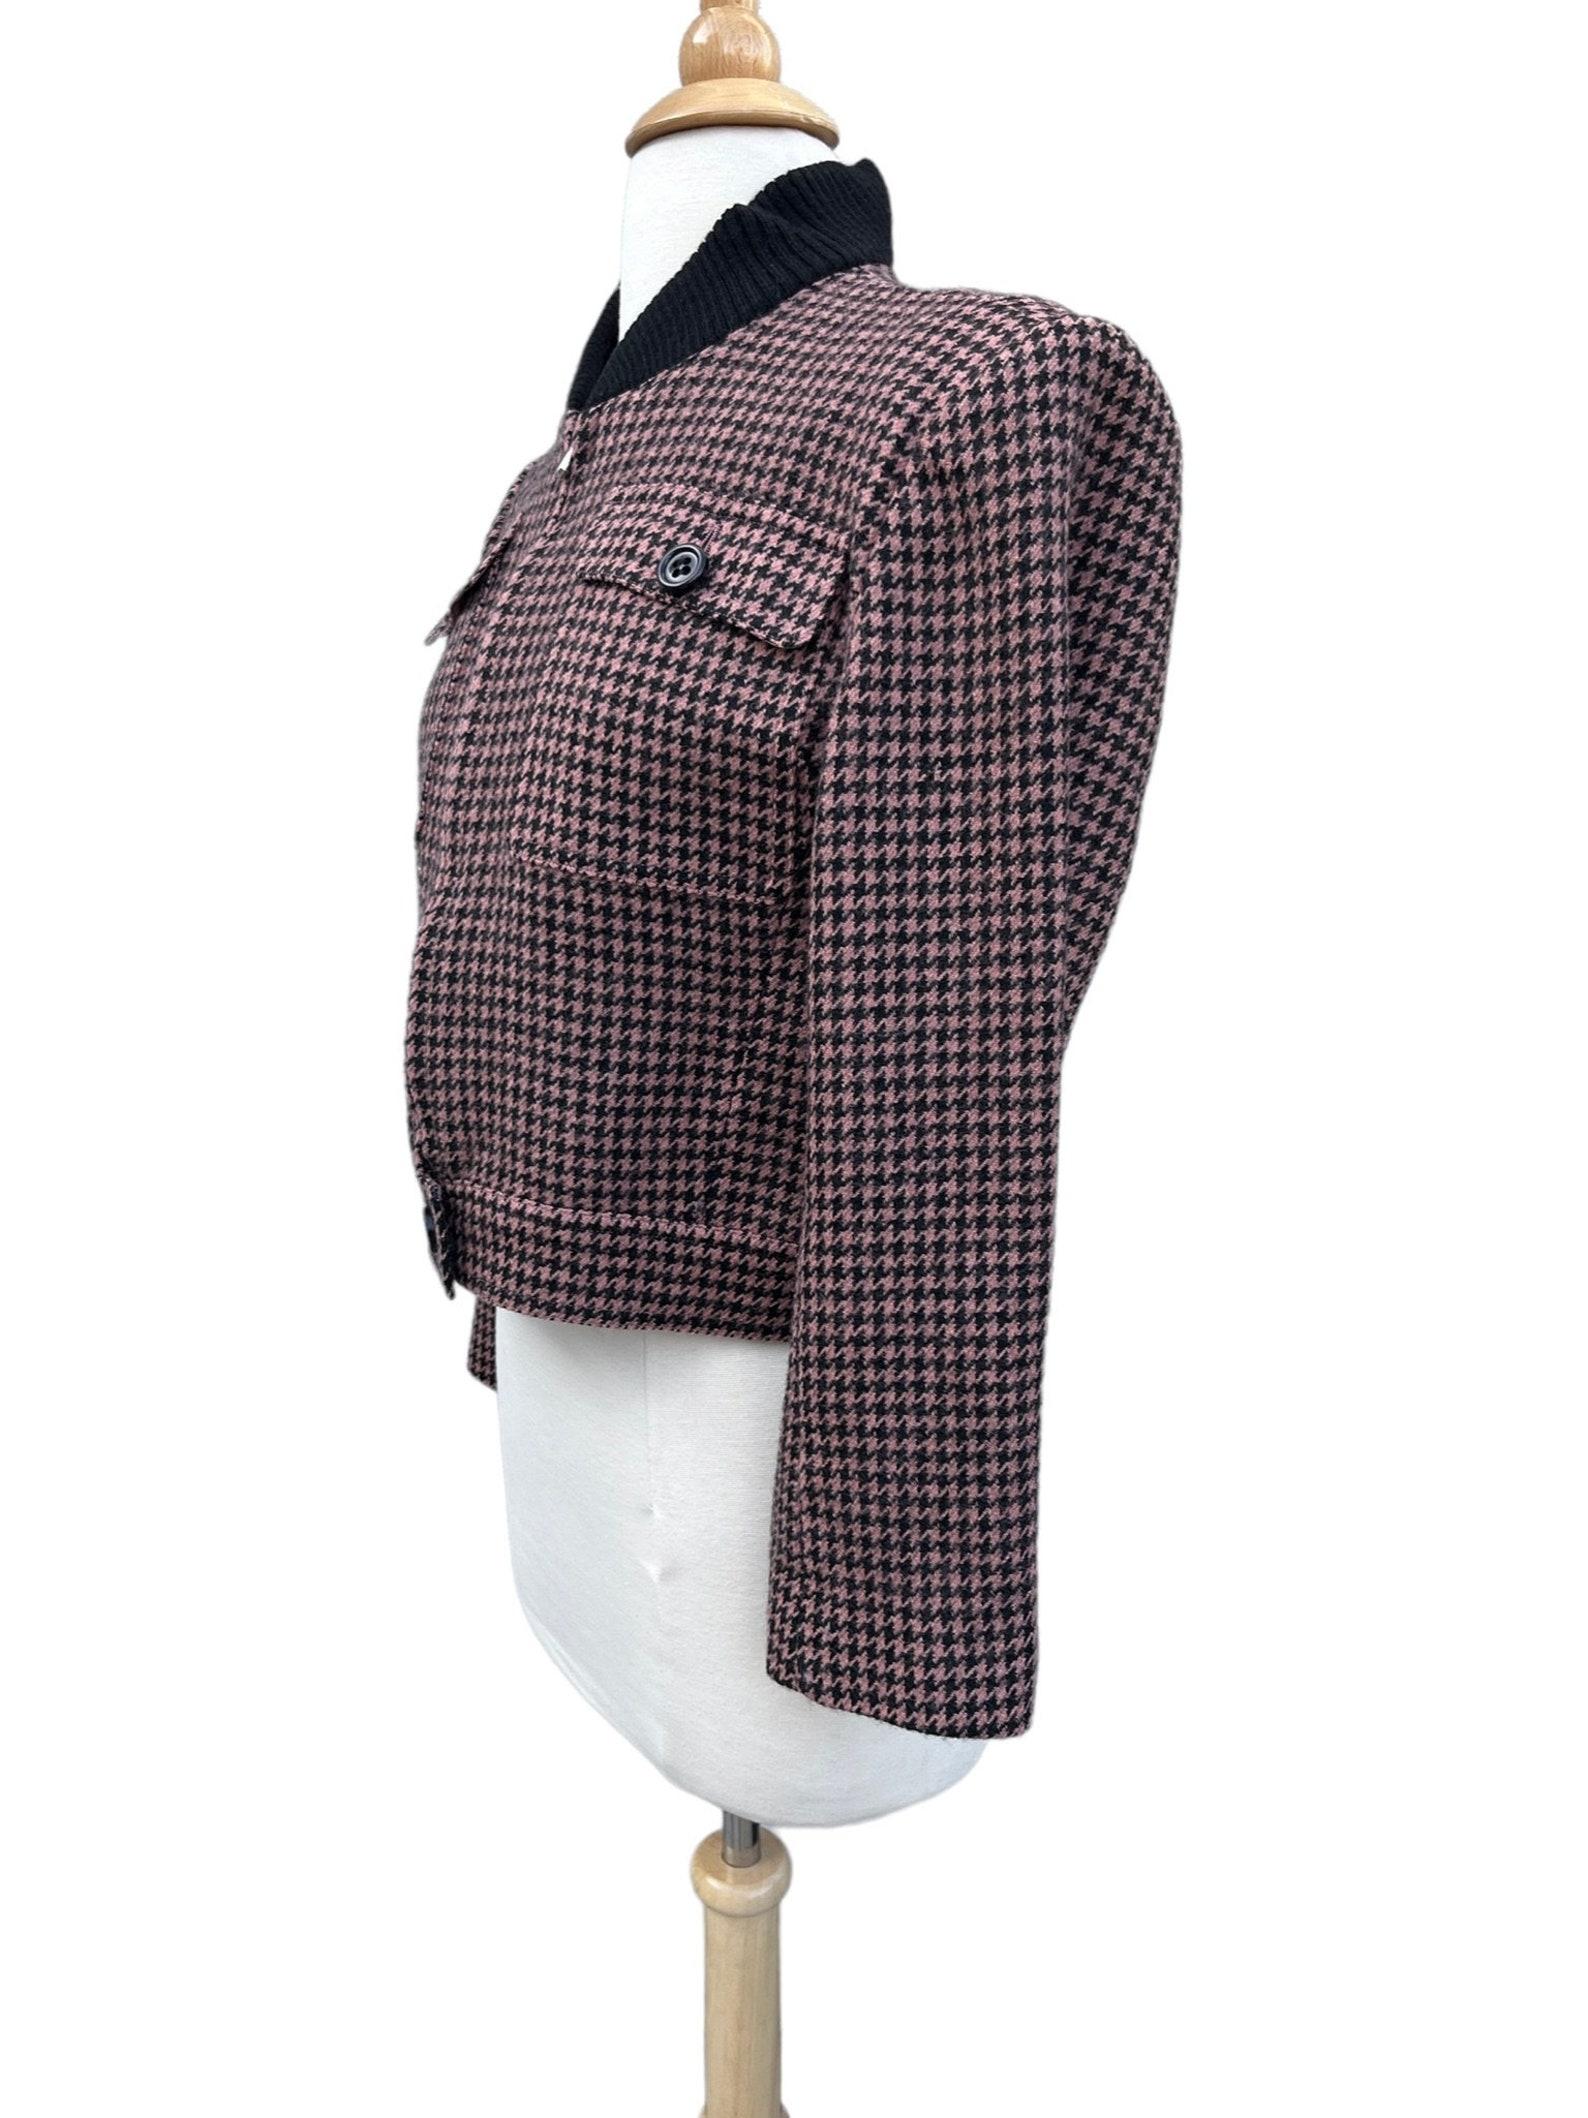 Guy Laroche houndstooth jacket For Sale 3